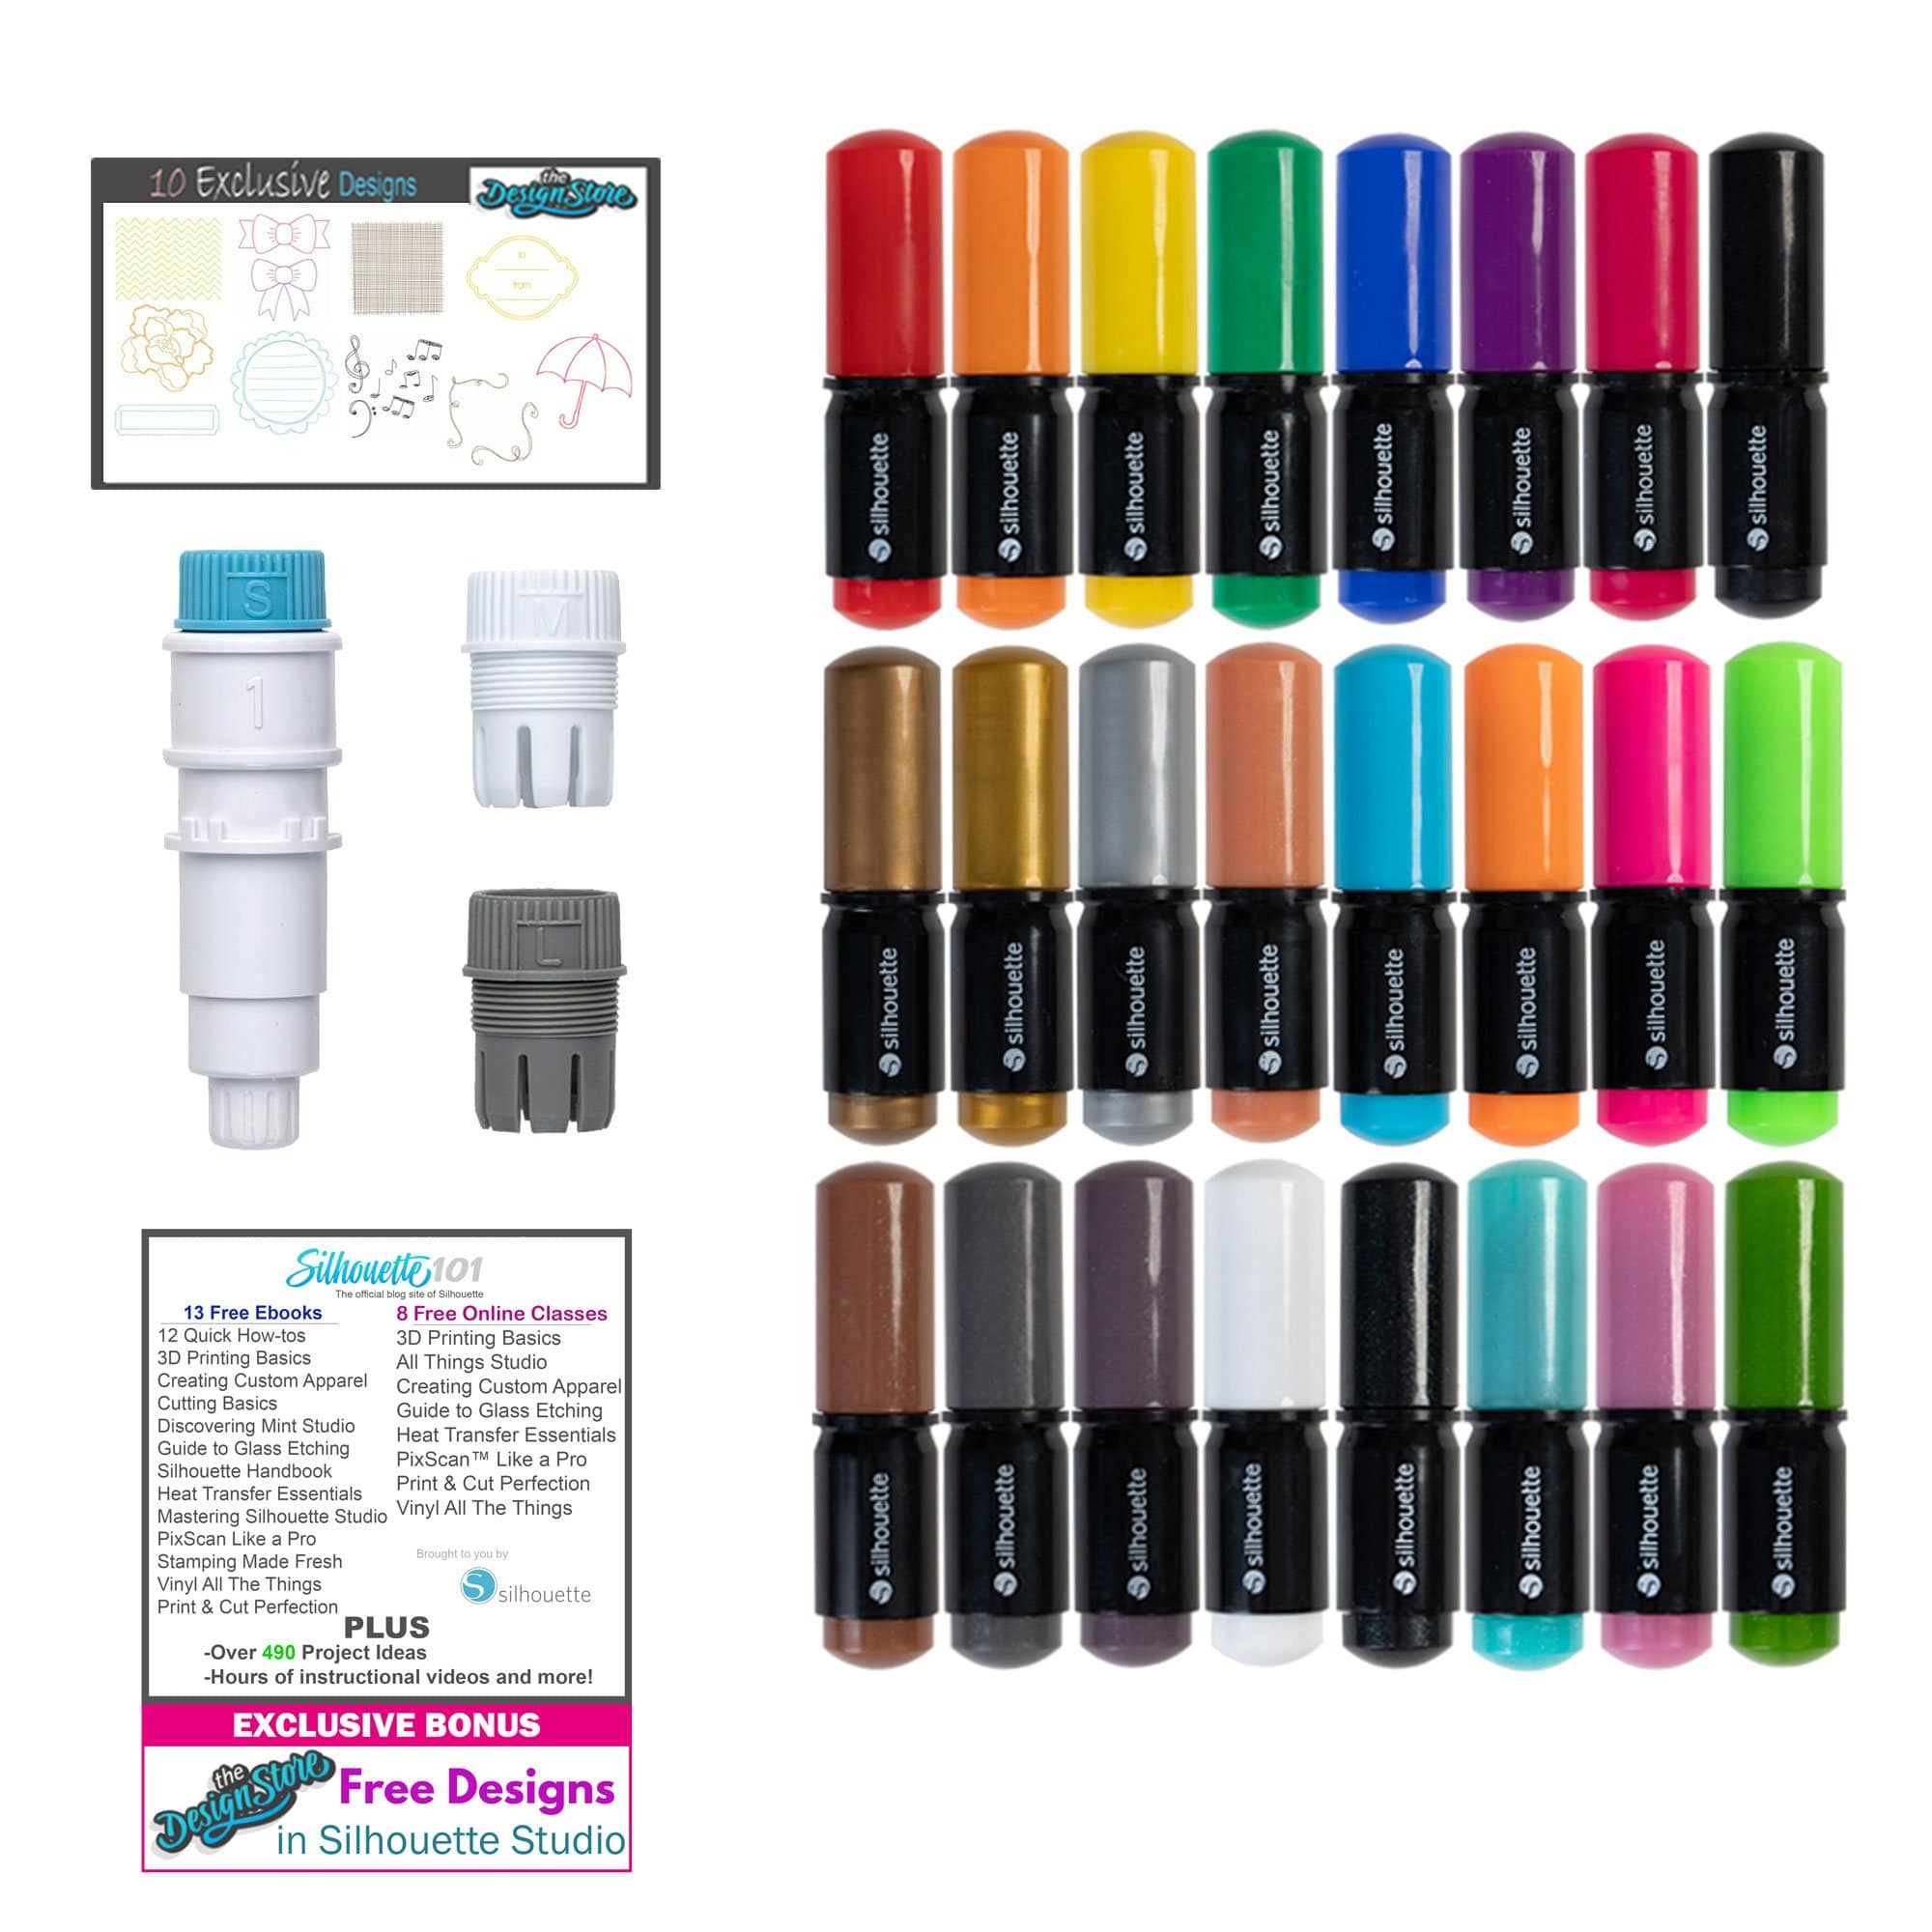 Silhouette America Pens Silhouette Deluxe Pen Starter Kit For Cameo 4 include 24 Pens, a Pen holder for use with your own pens and a Guide to Silhouette 101 with Free Designs